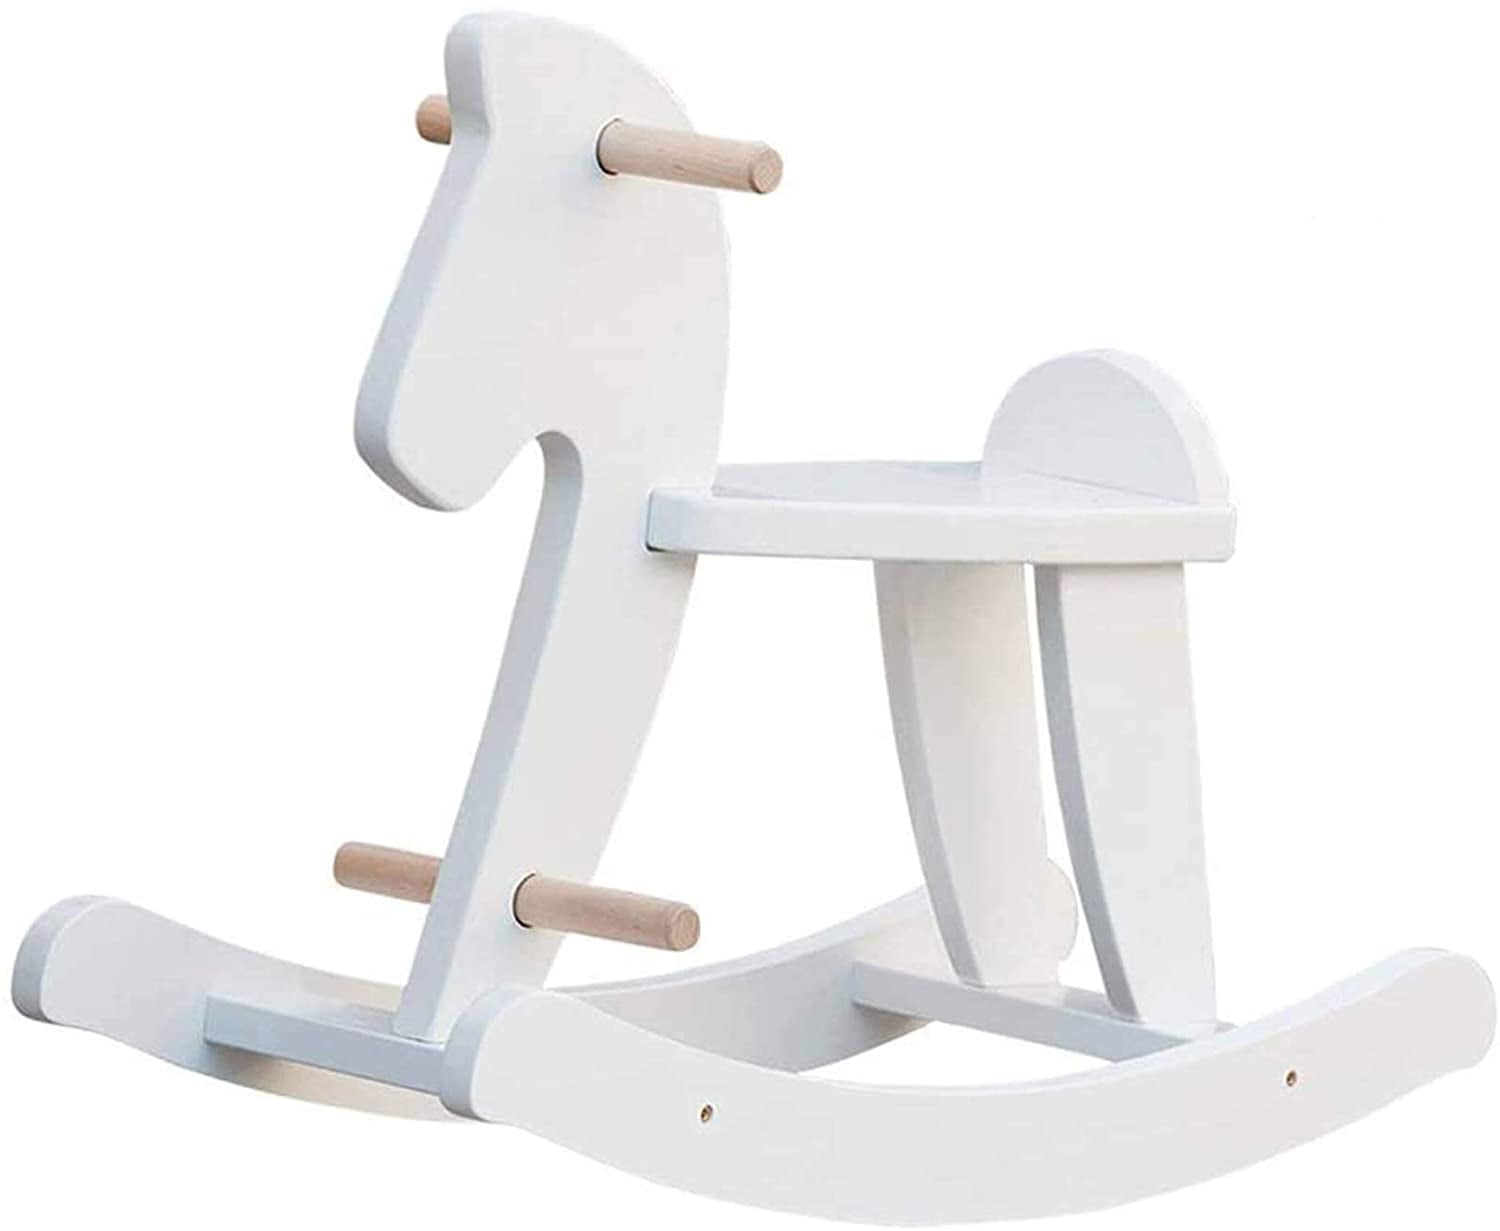 NEW WOODEN BABY ROCKING ANIMAL HORSE RIDE ON ROCKER CHAIR KID TOY X MAS GIFT 